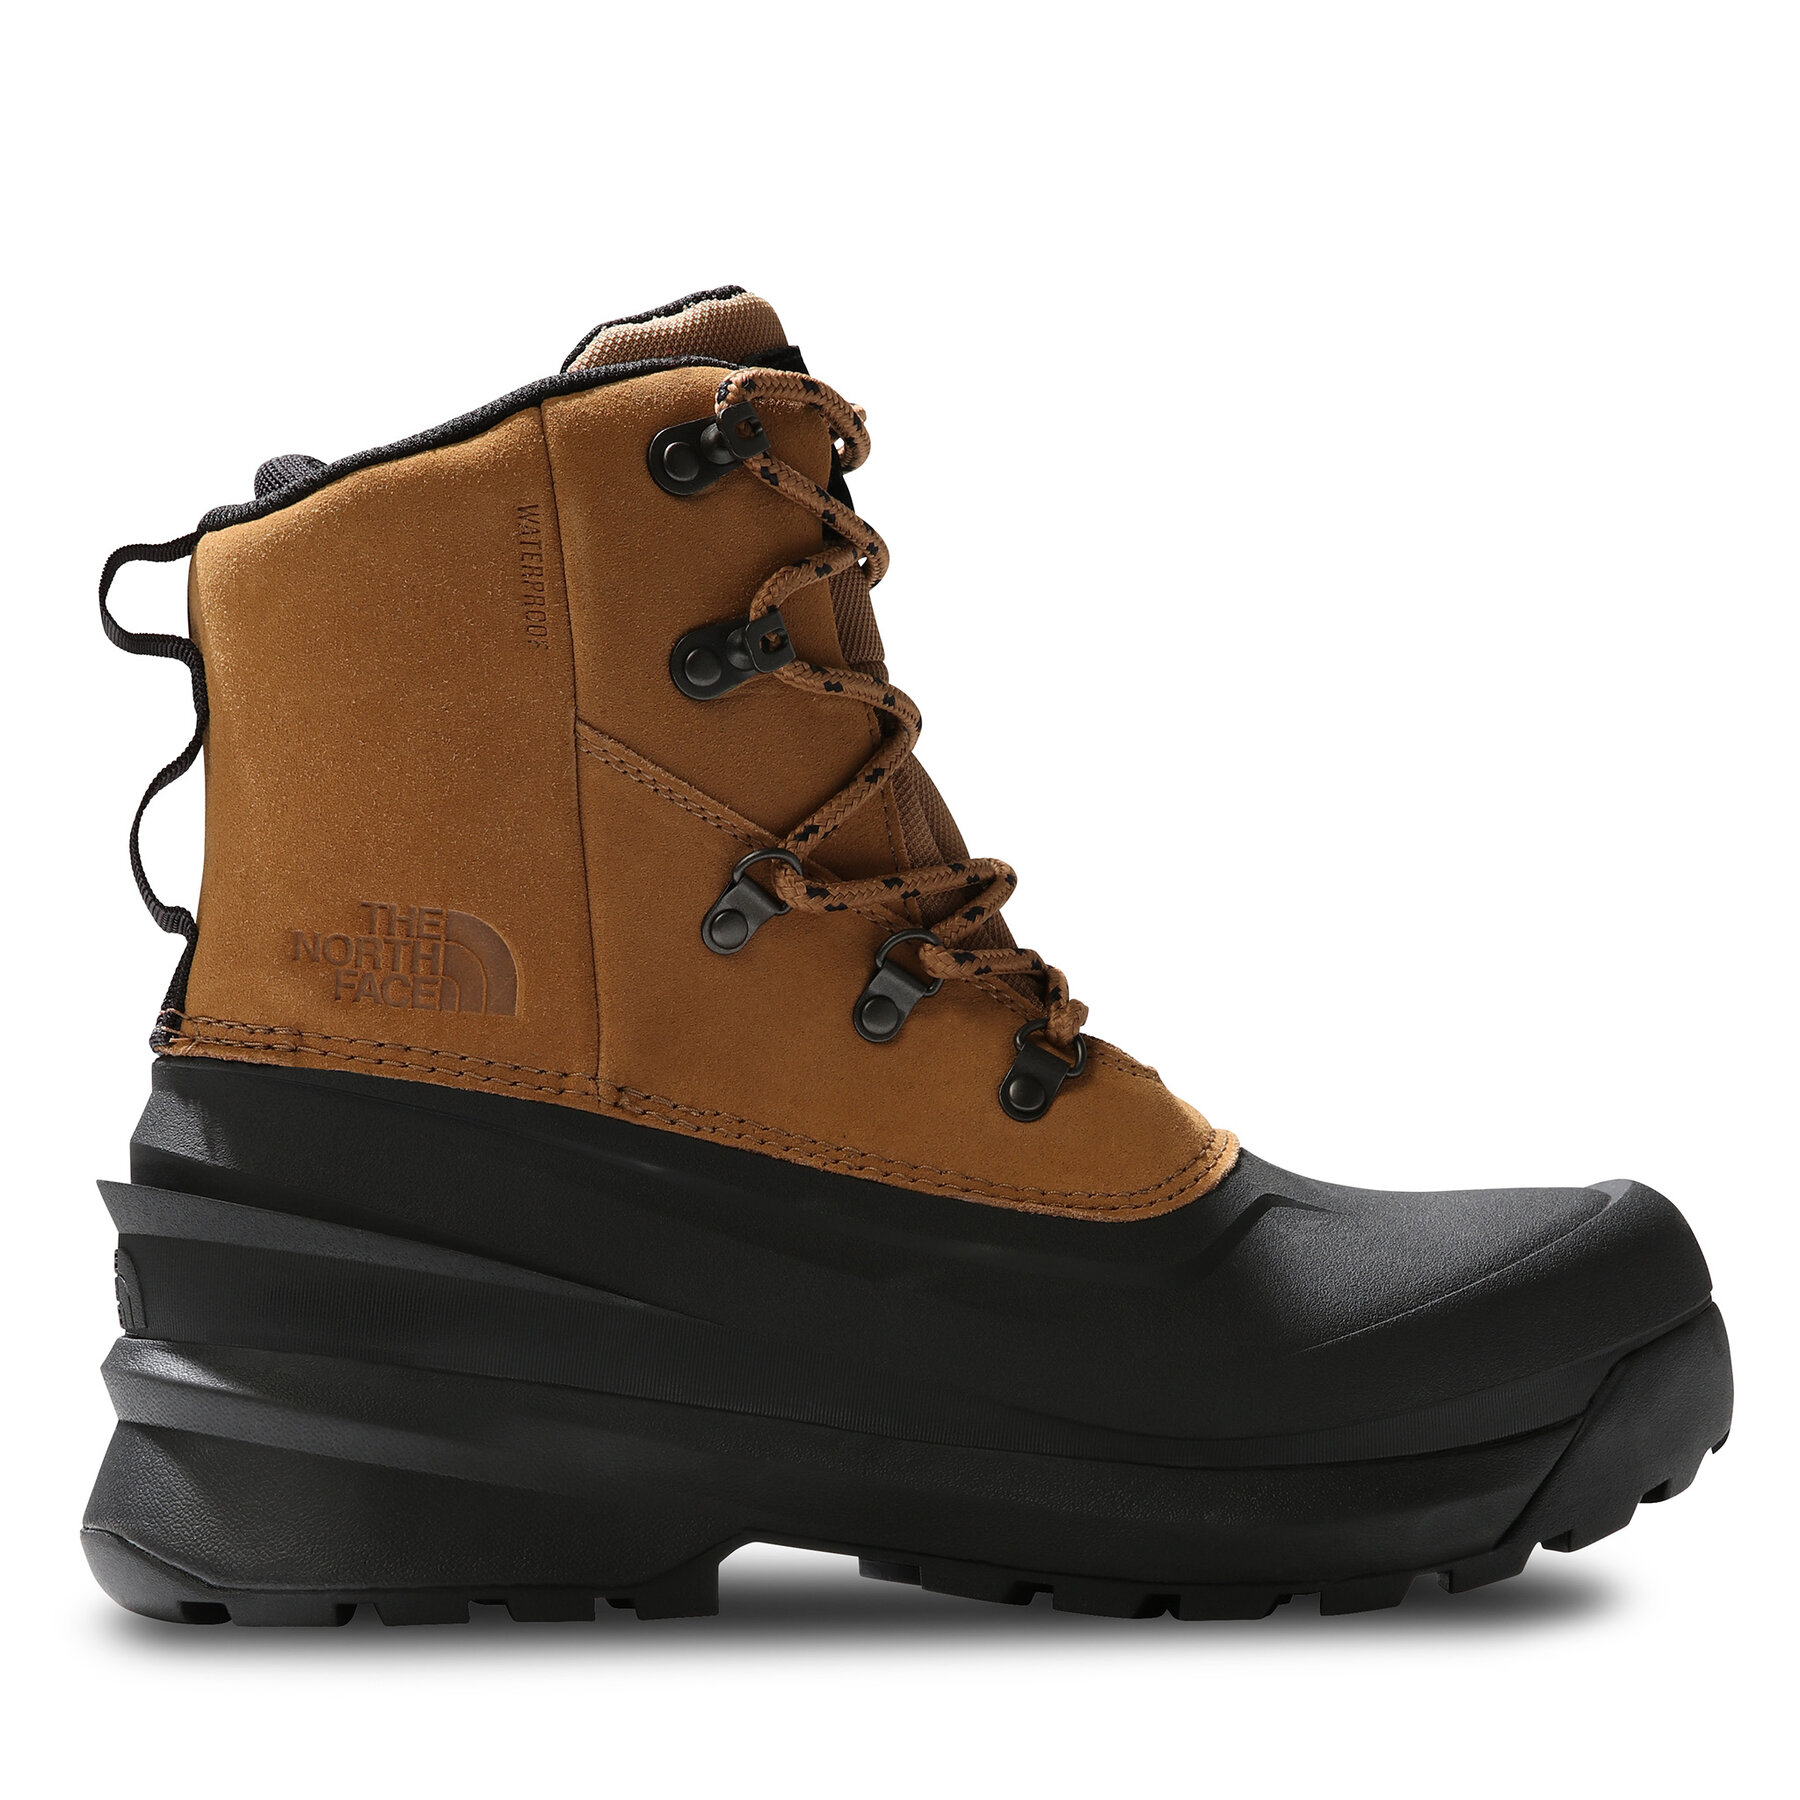 Stiefel The North Face Chelikat V Lace Wp NF0A5LW3YW21 Utility Brown/Tnf Black von The North Face